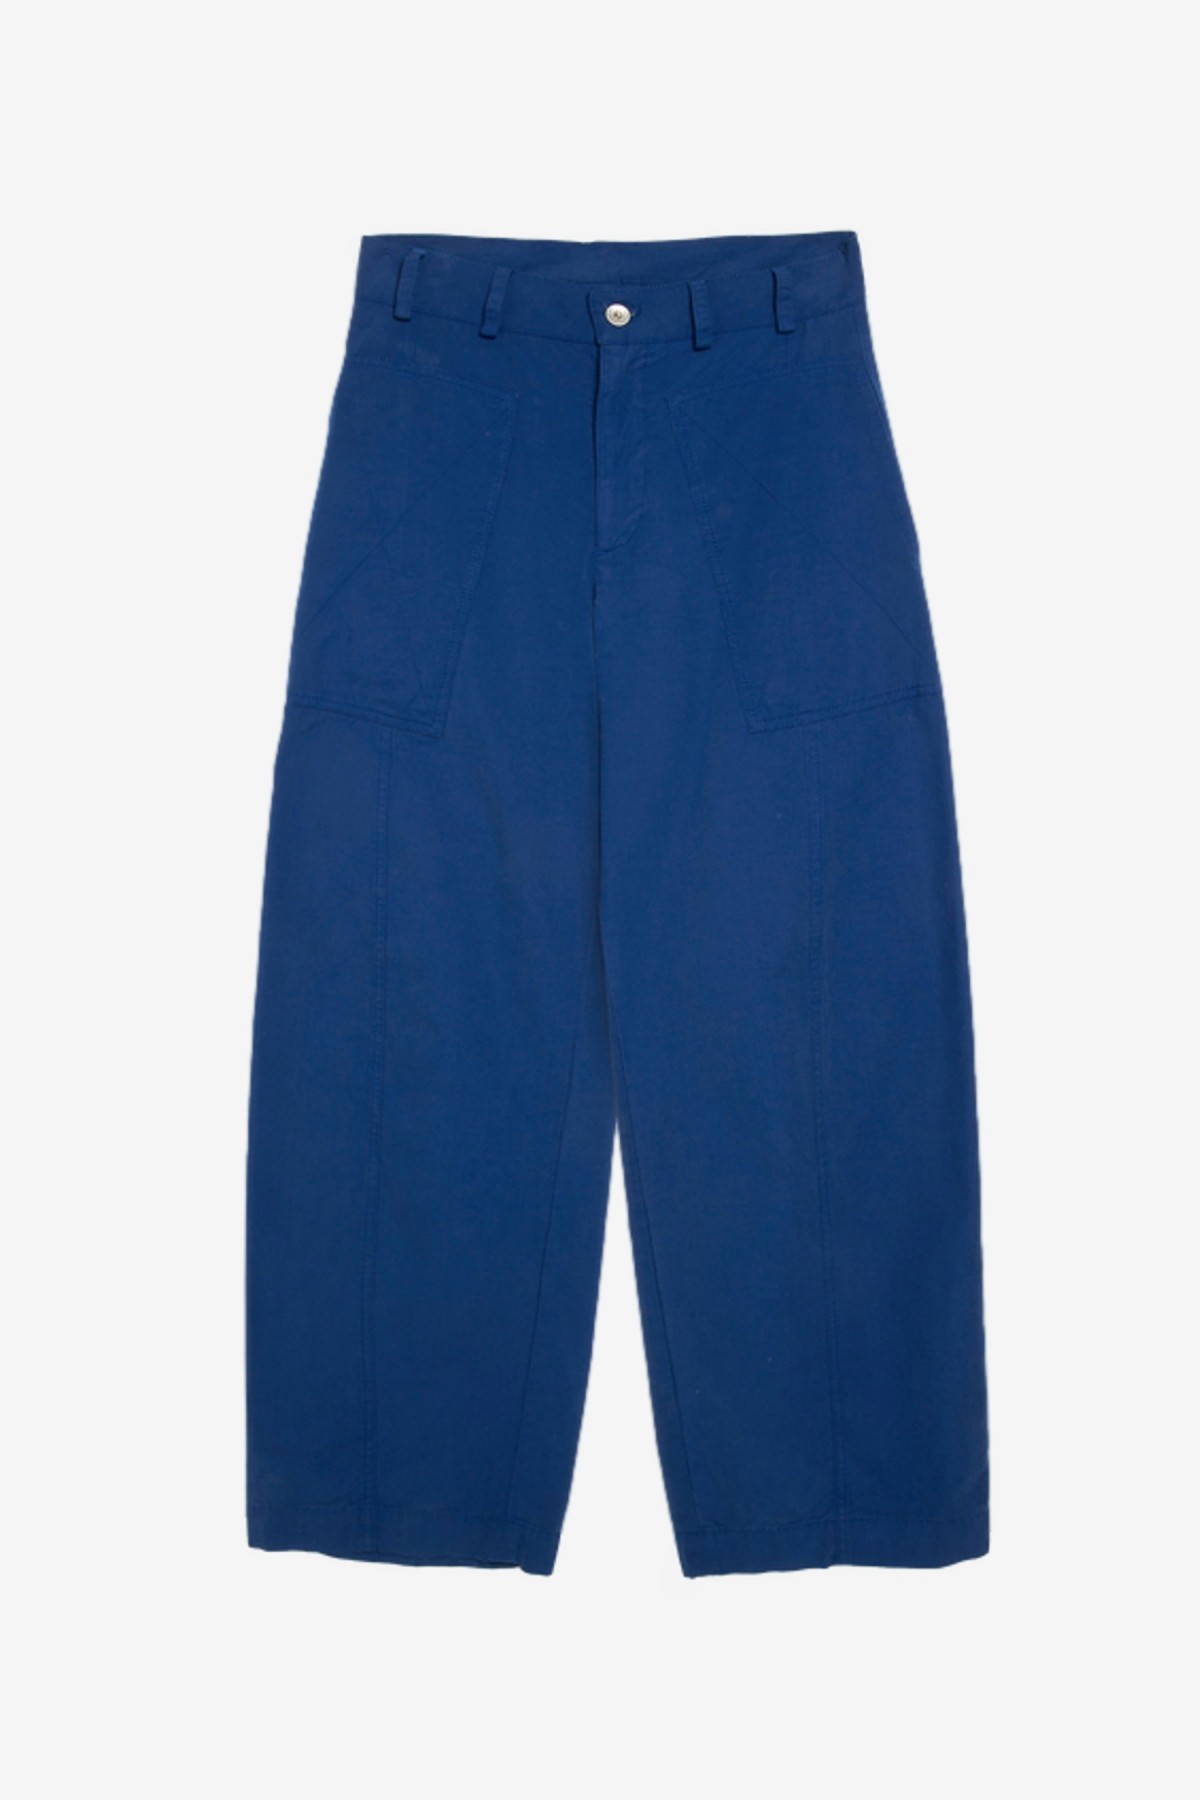 YMC You Must Create Peggy Trouser in Blue